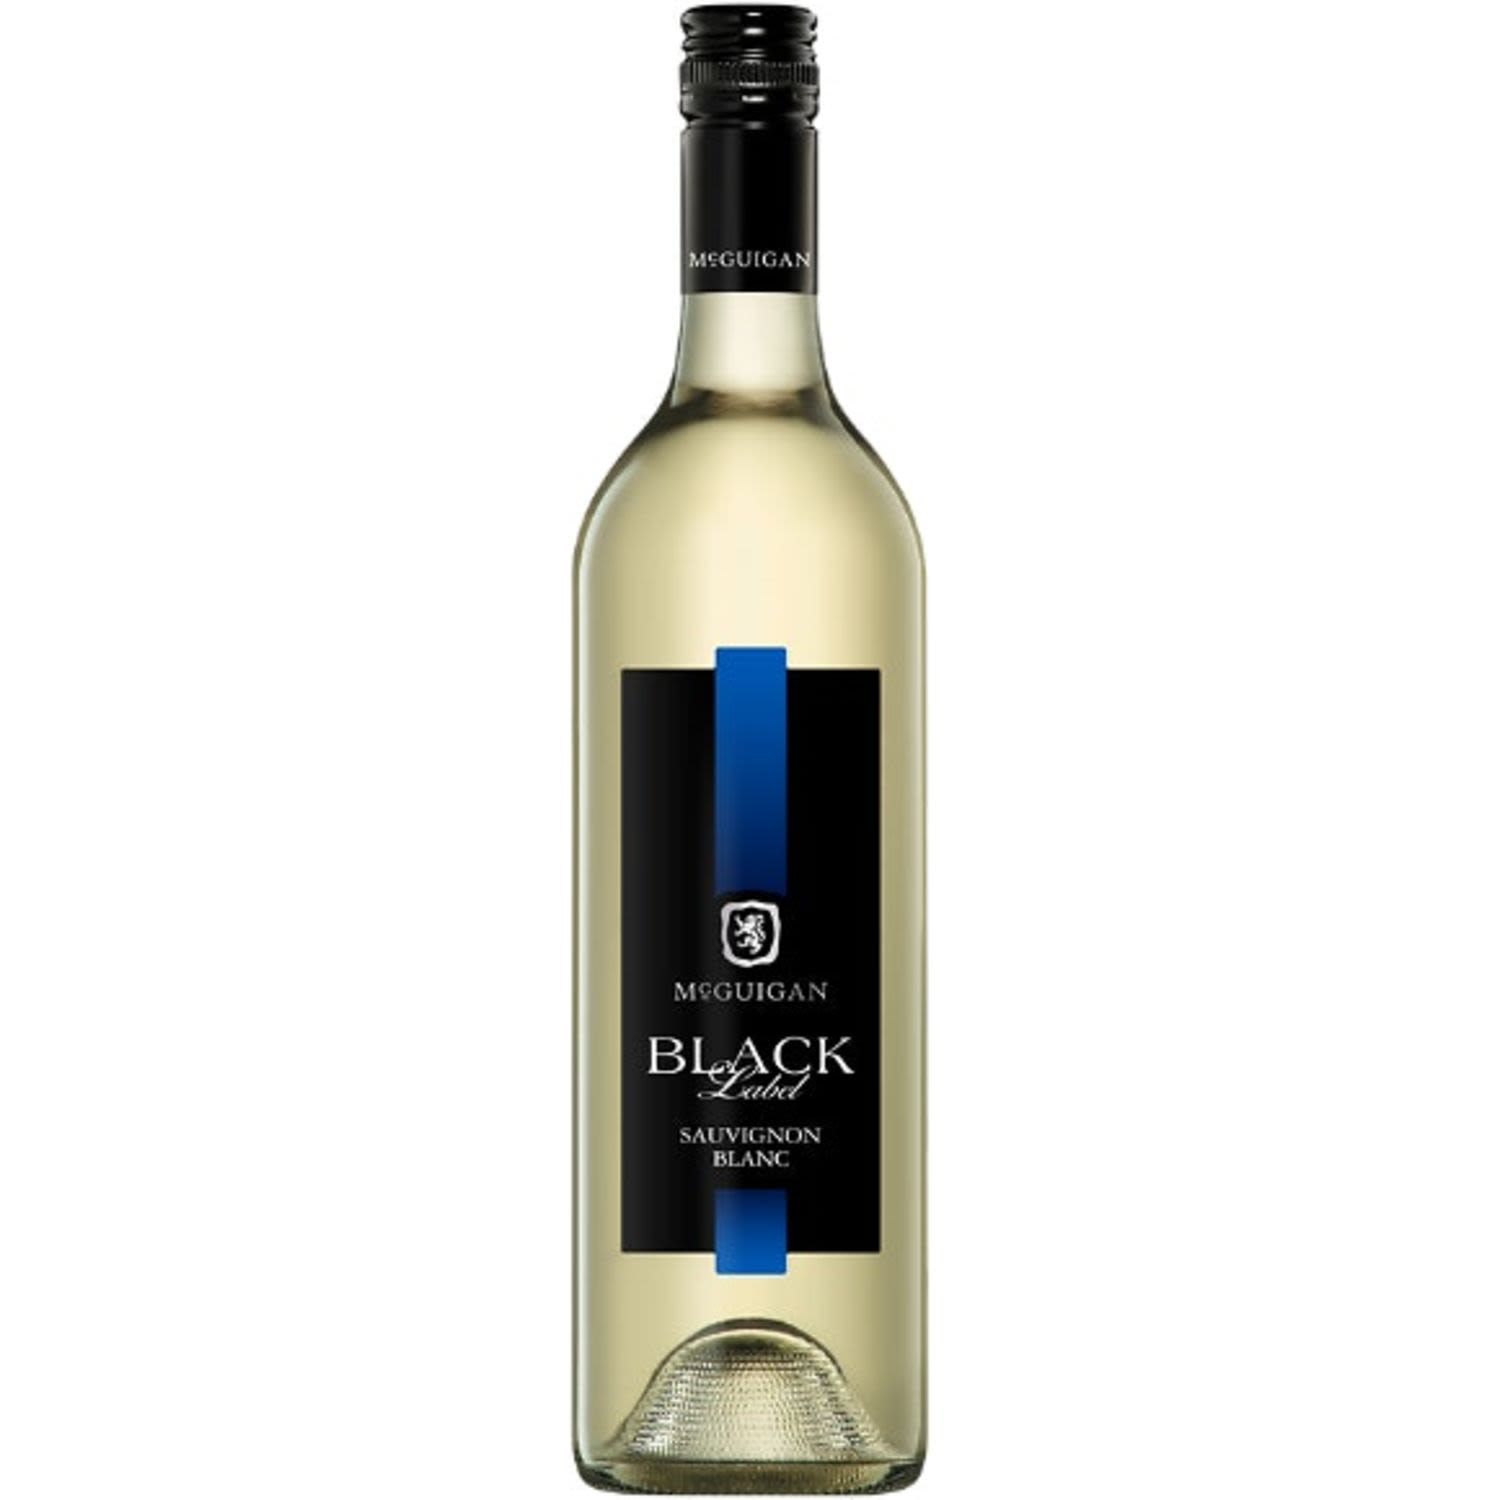 A full-flavoured wine with the classic characters of passionfruit, cut grass and hints of peach. These great varietal flavours are perfectly balanced by a clean, crisp finish.<br /> <br />Alcohol Volume: 12.50%<br /><br />Pack Format: Bottle<br /><br />Standard Drinks: 7.4</br /><br />Pack Type: Bottle<br /><br />Country of Origin: Australia<br /><br />Region: South Eastern Australia<br /><br />Vintage: '2019<br />